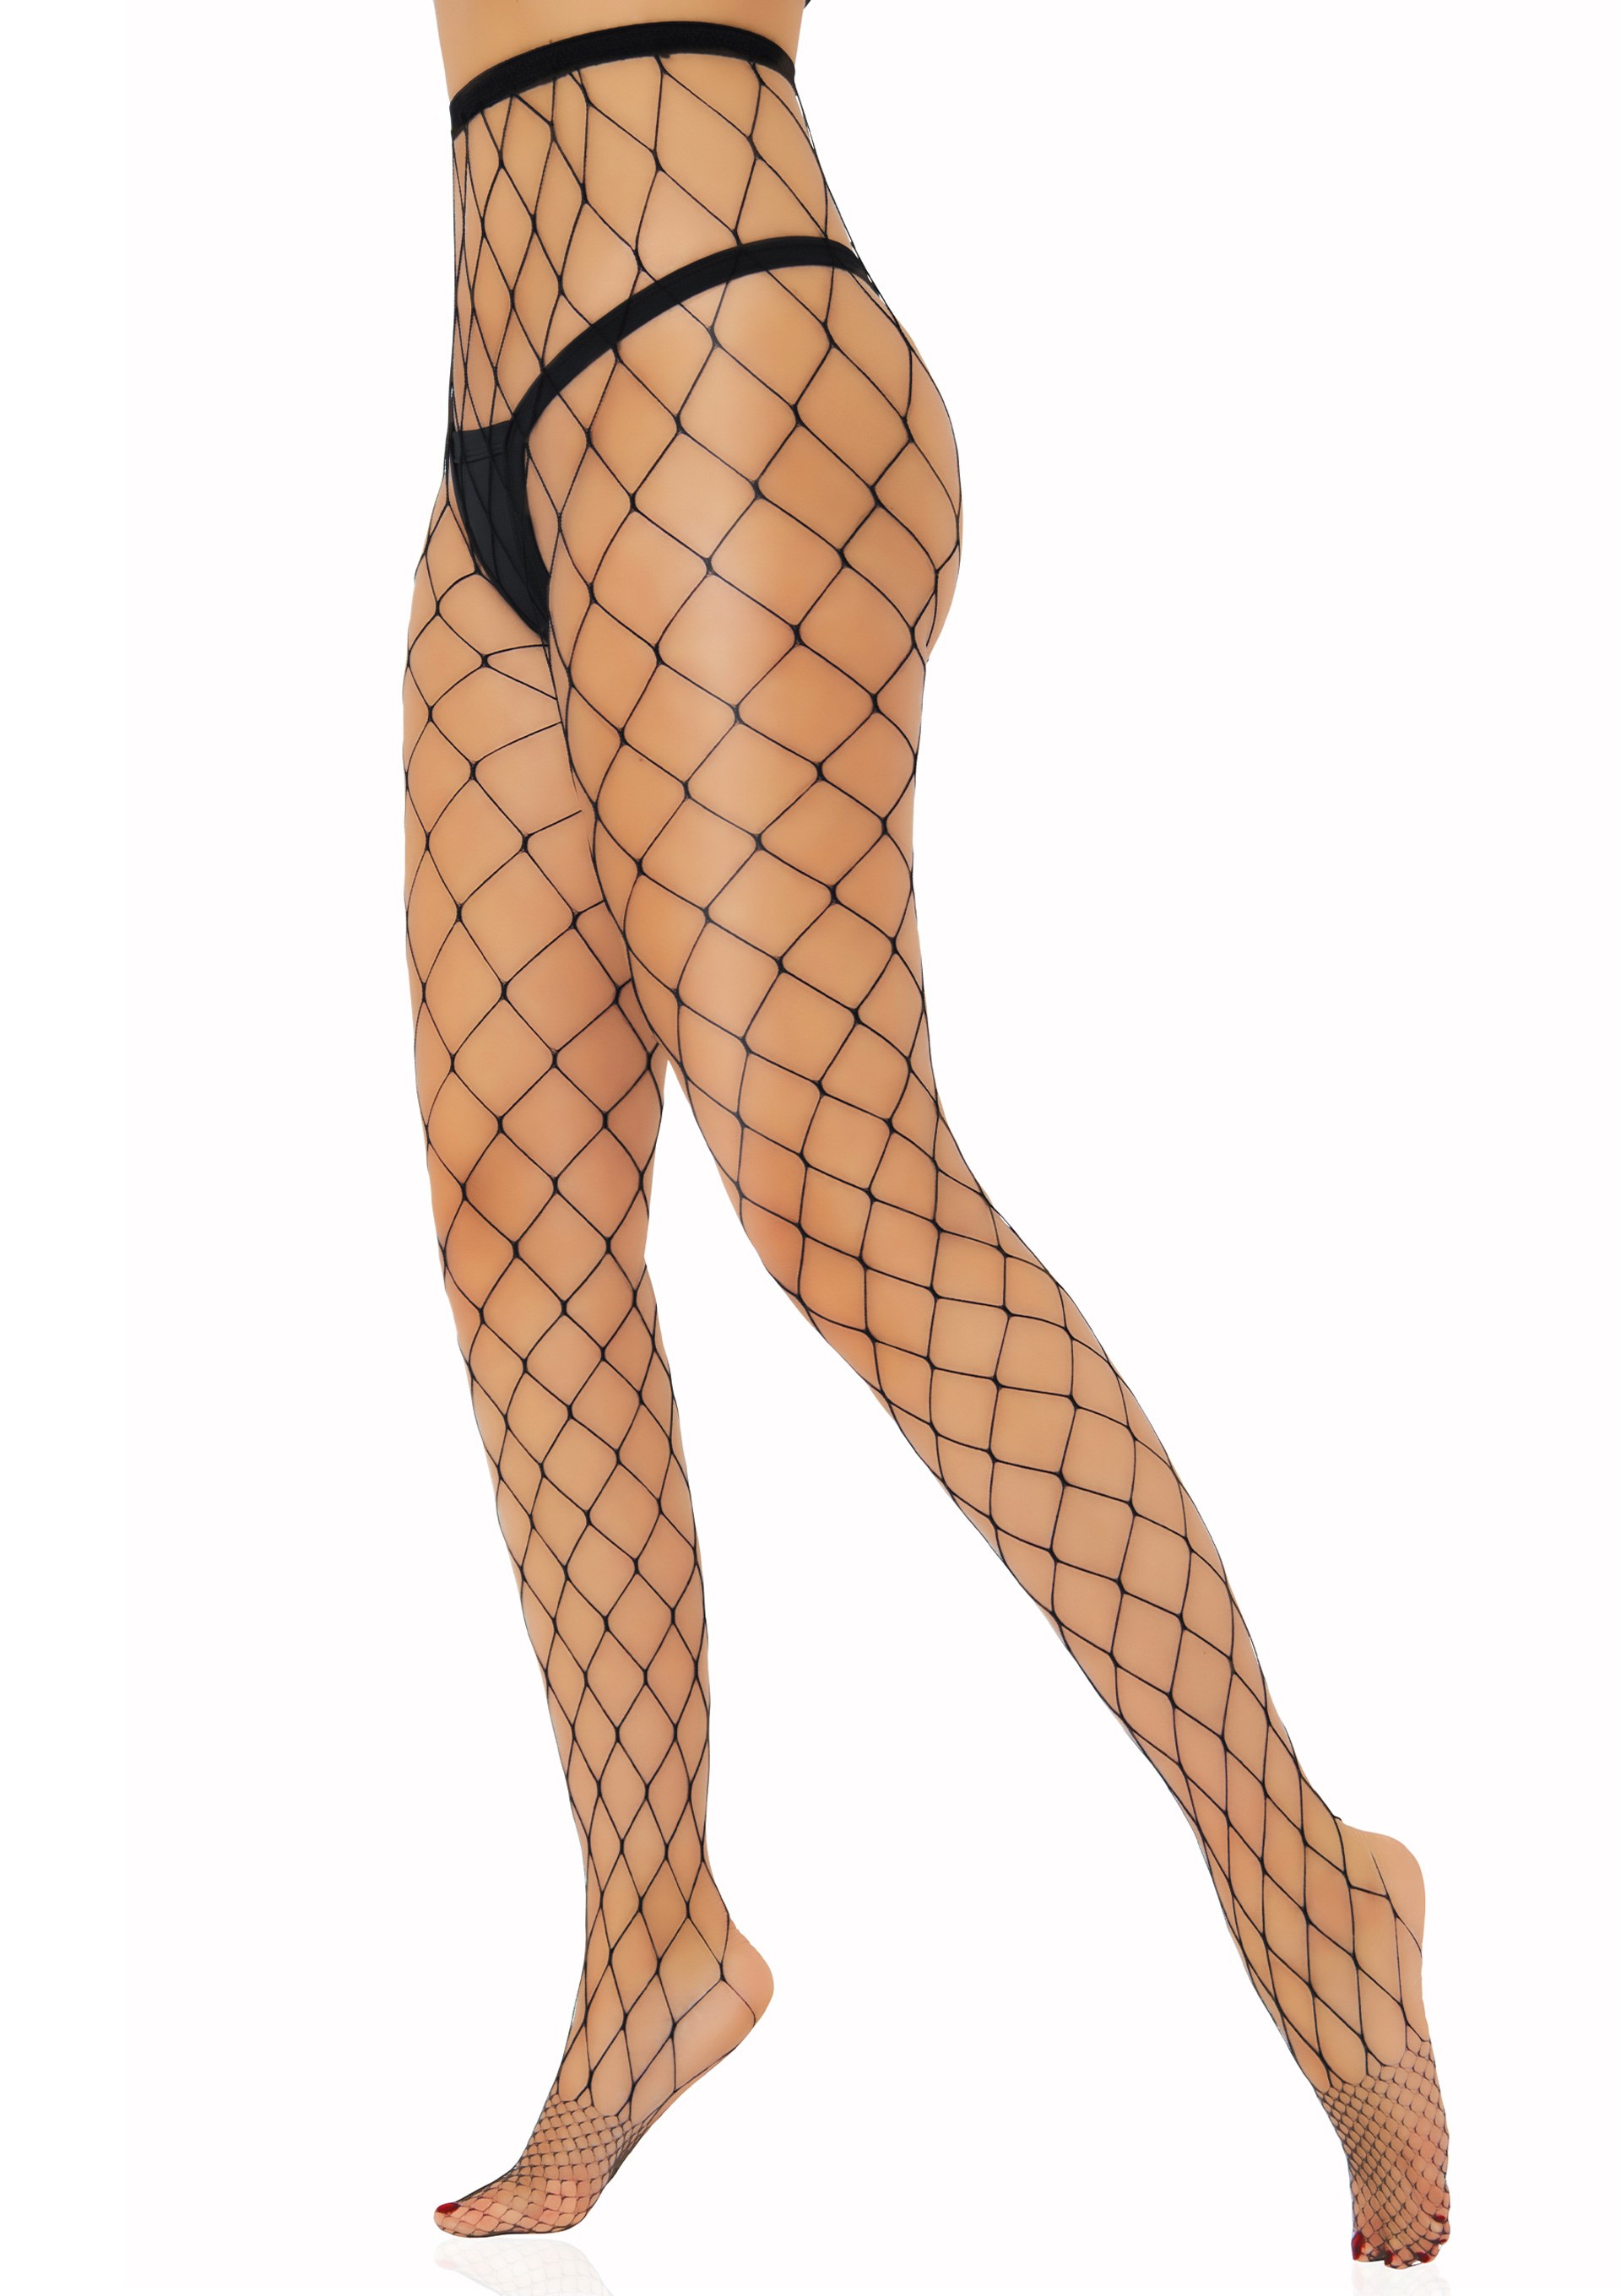 Over Sized Net Tights